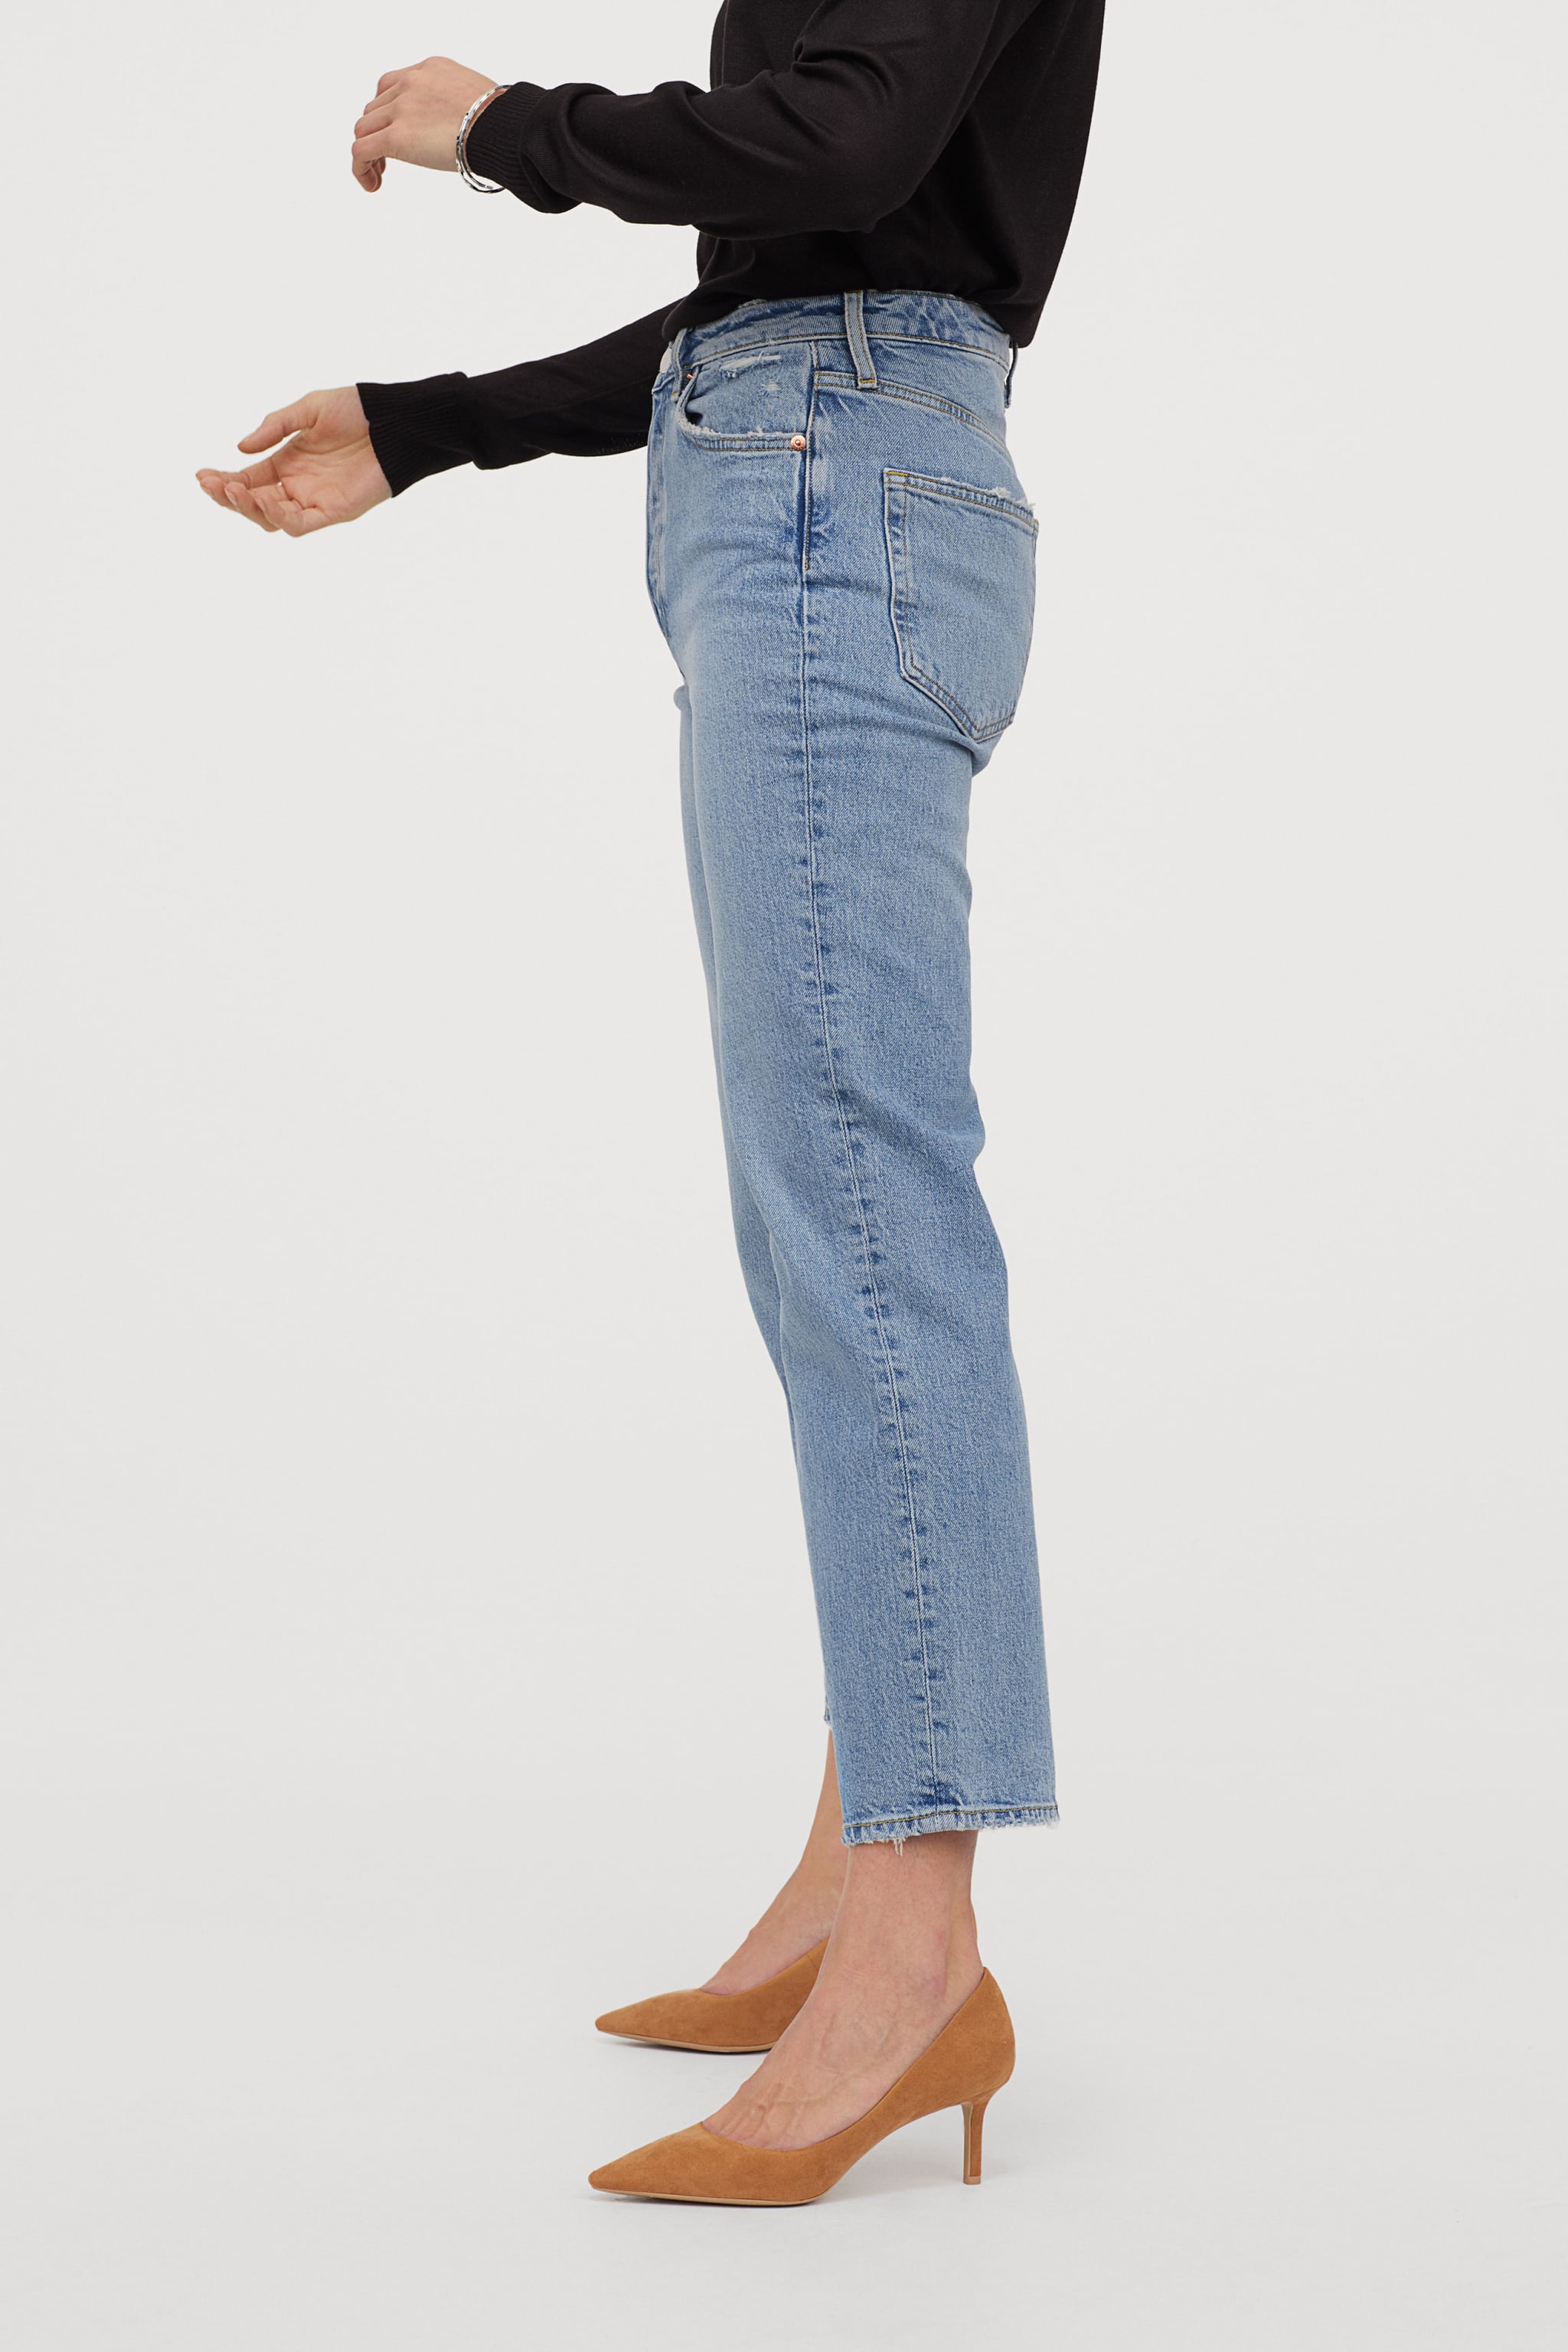 h&m straight high ankle jeans